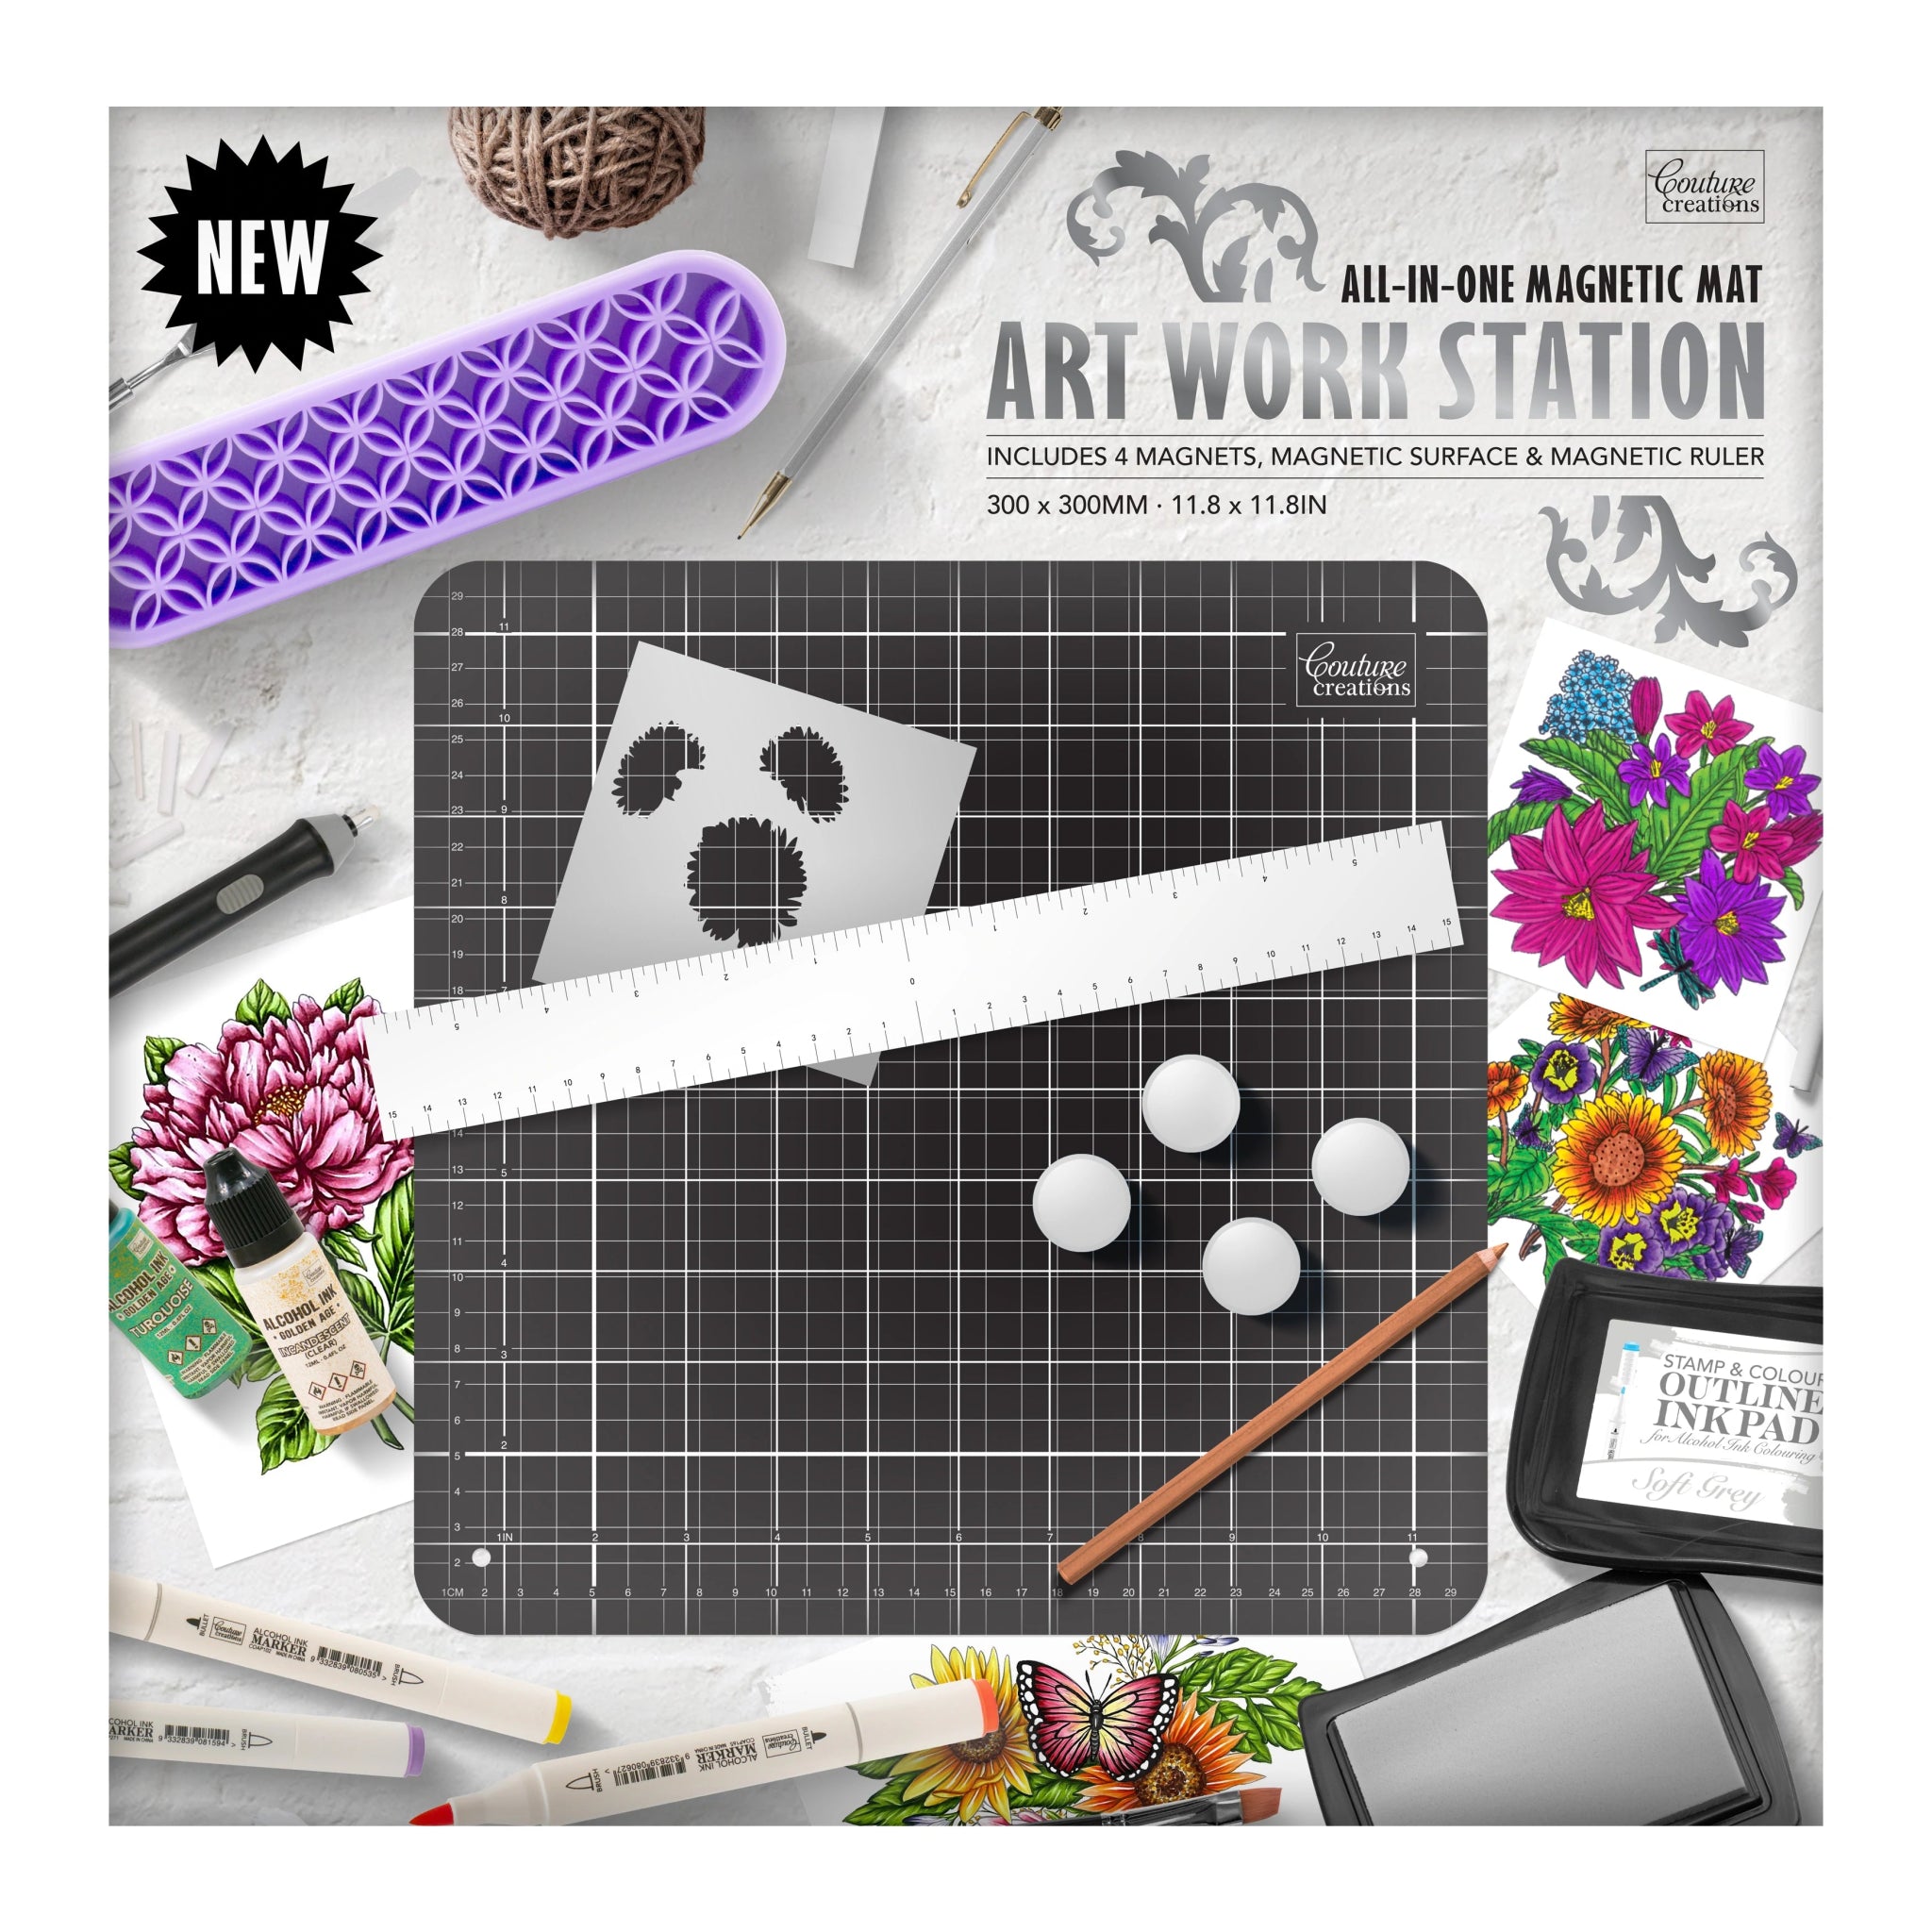 All-in-One Magnetic Art Work Station - Crafty Divas